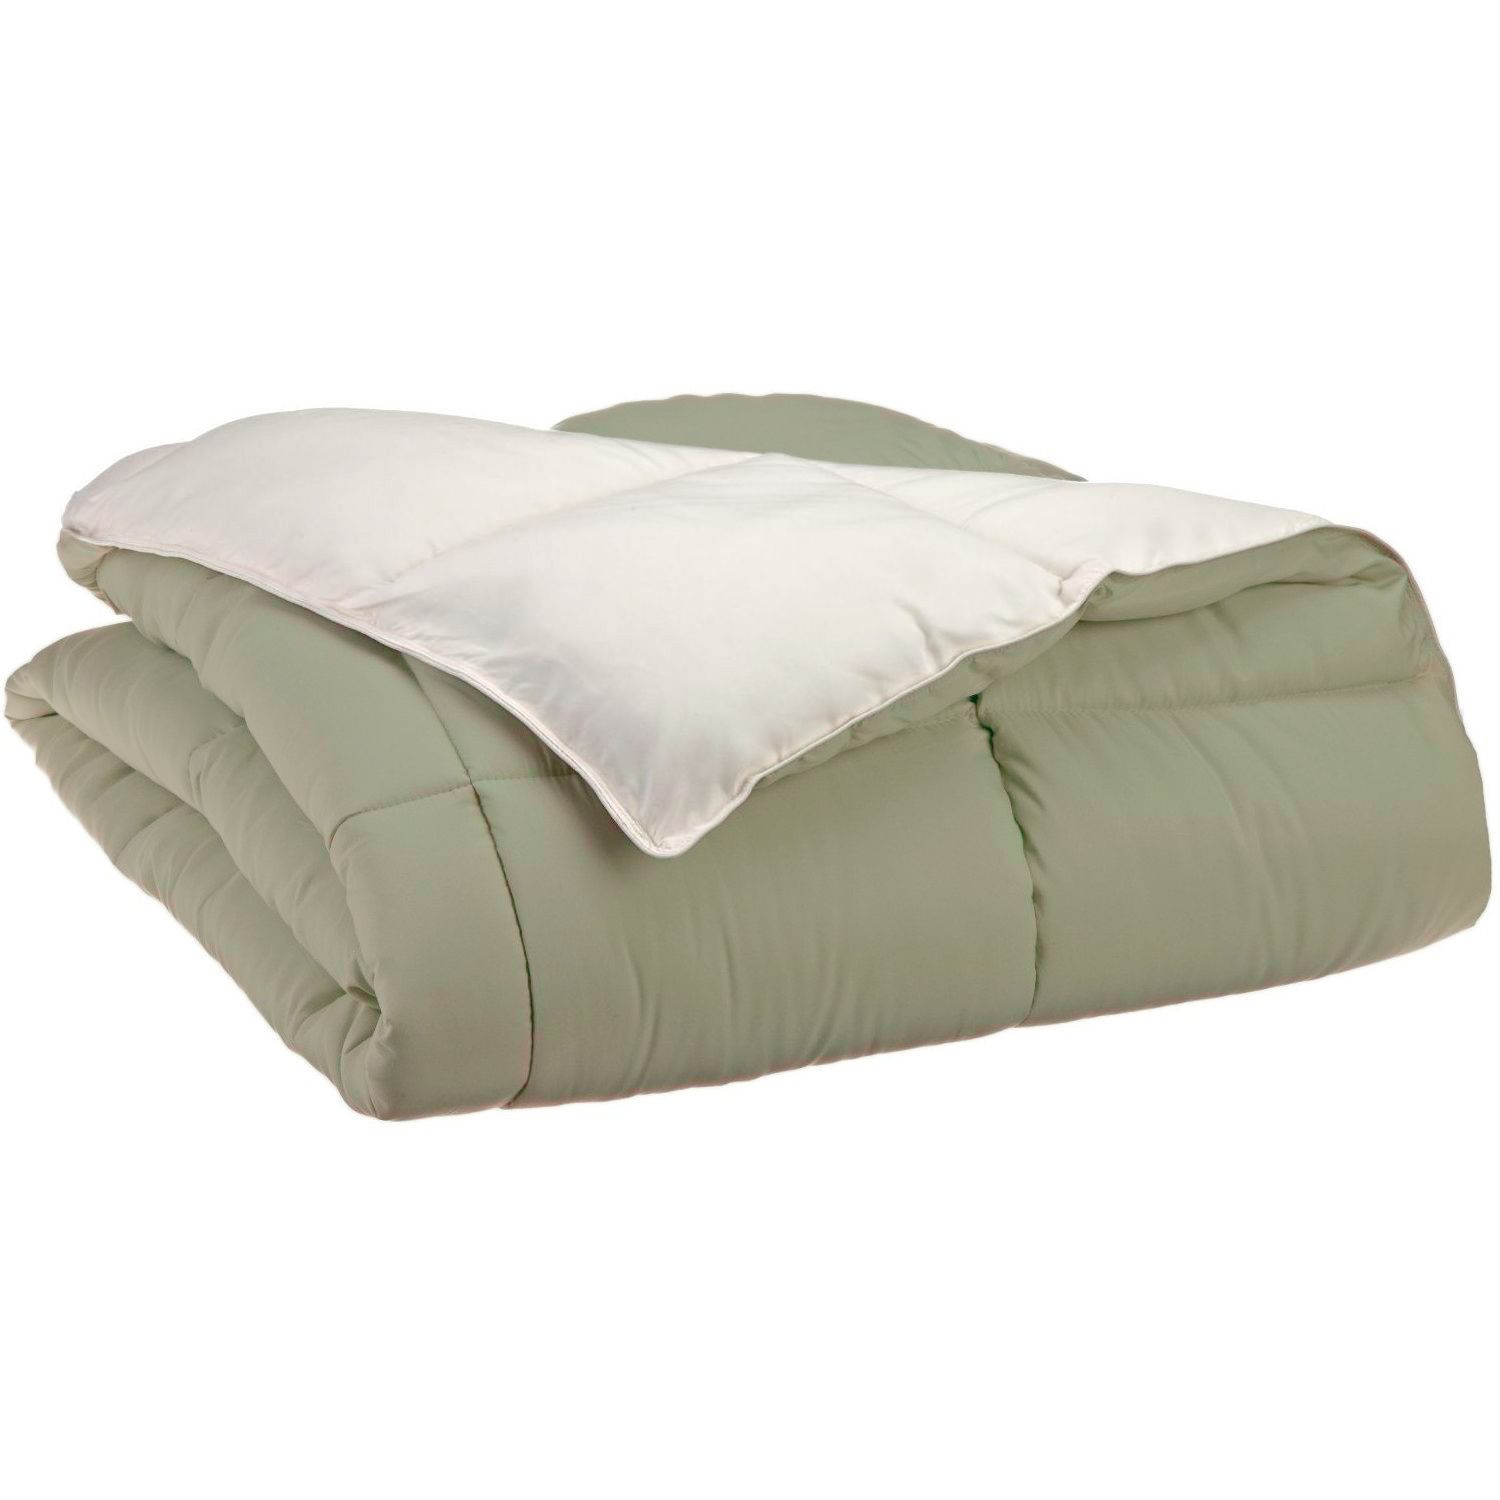 Superior Down Alternative Reversible Comforter, Twin/ Twin XL, Ivory/ Sage - image 1 of 4